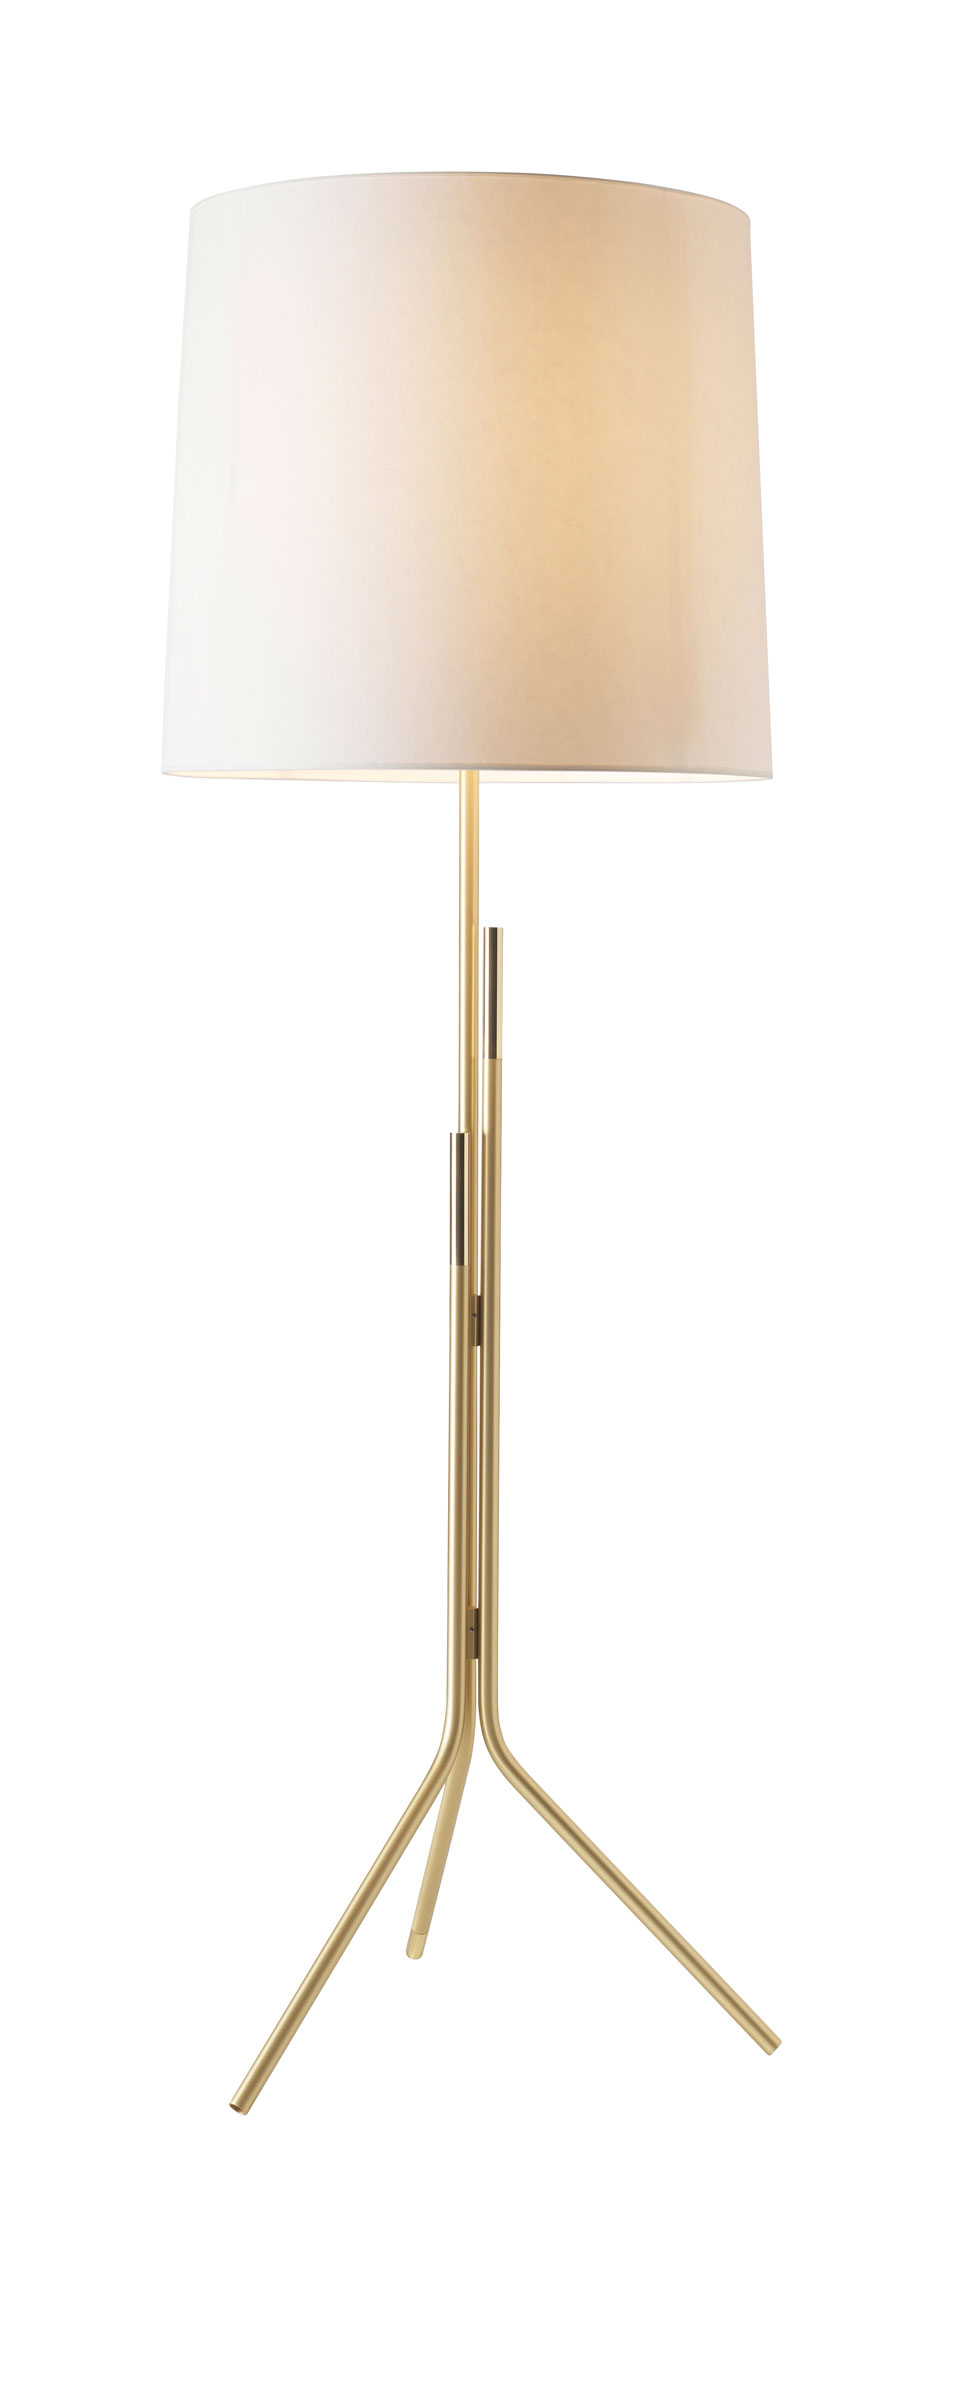 Contemporary Floor Lamp Brass Stand Cylindrical Shade In White Drop Paper Design Herv Langlais with proportions 960 X 2399